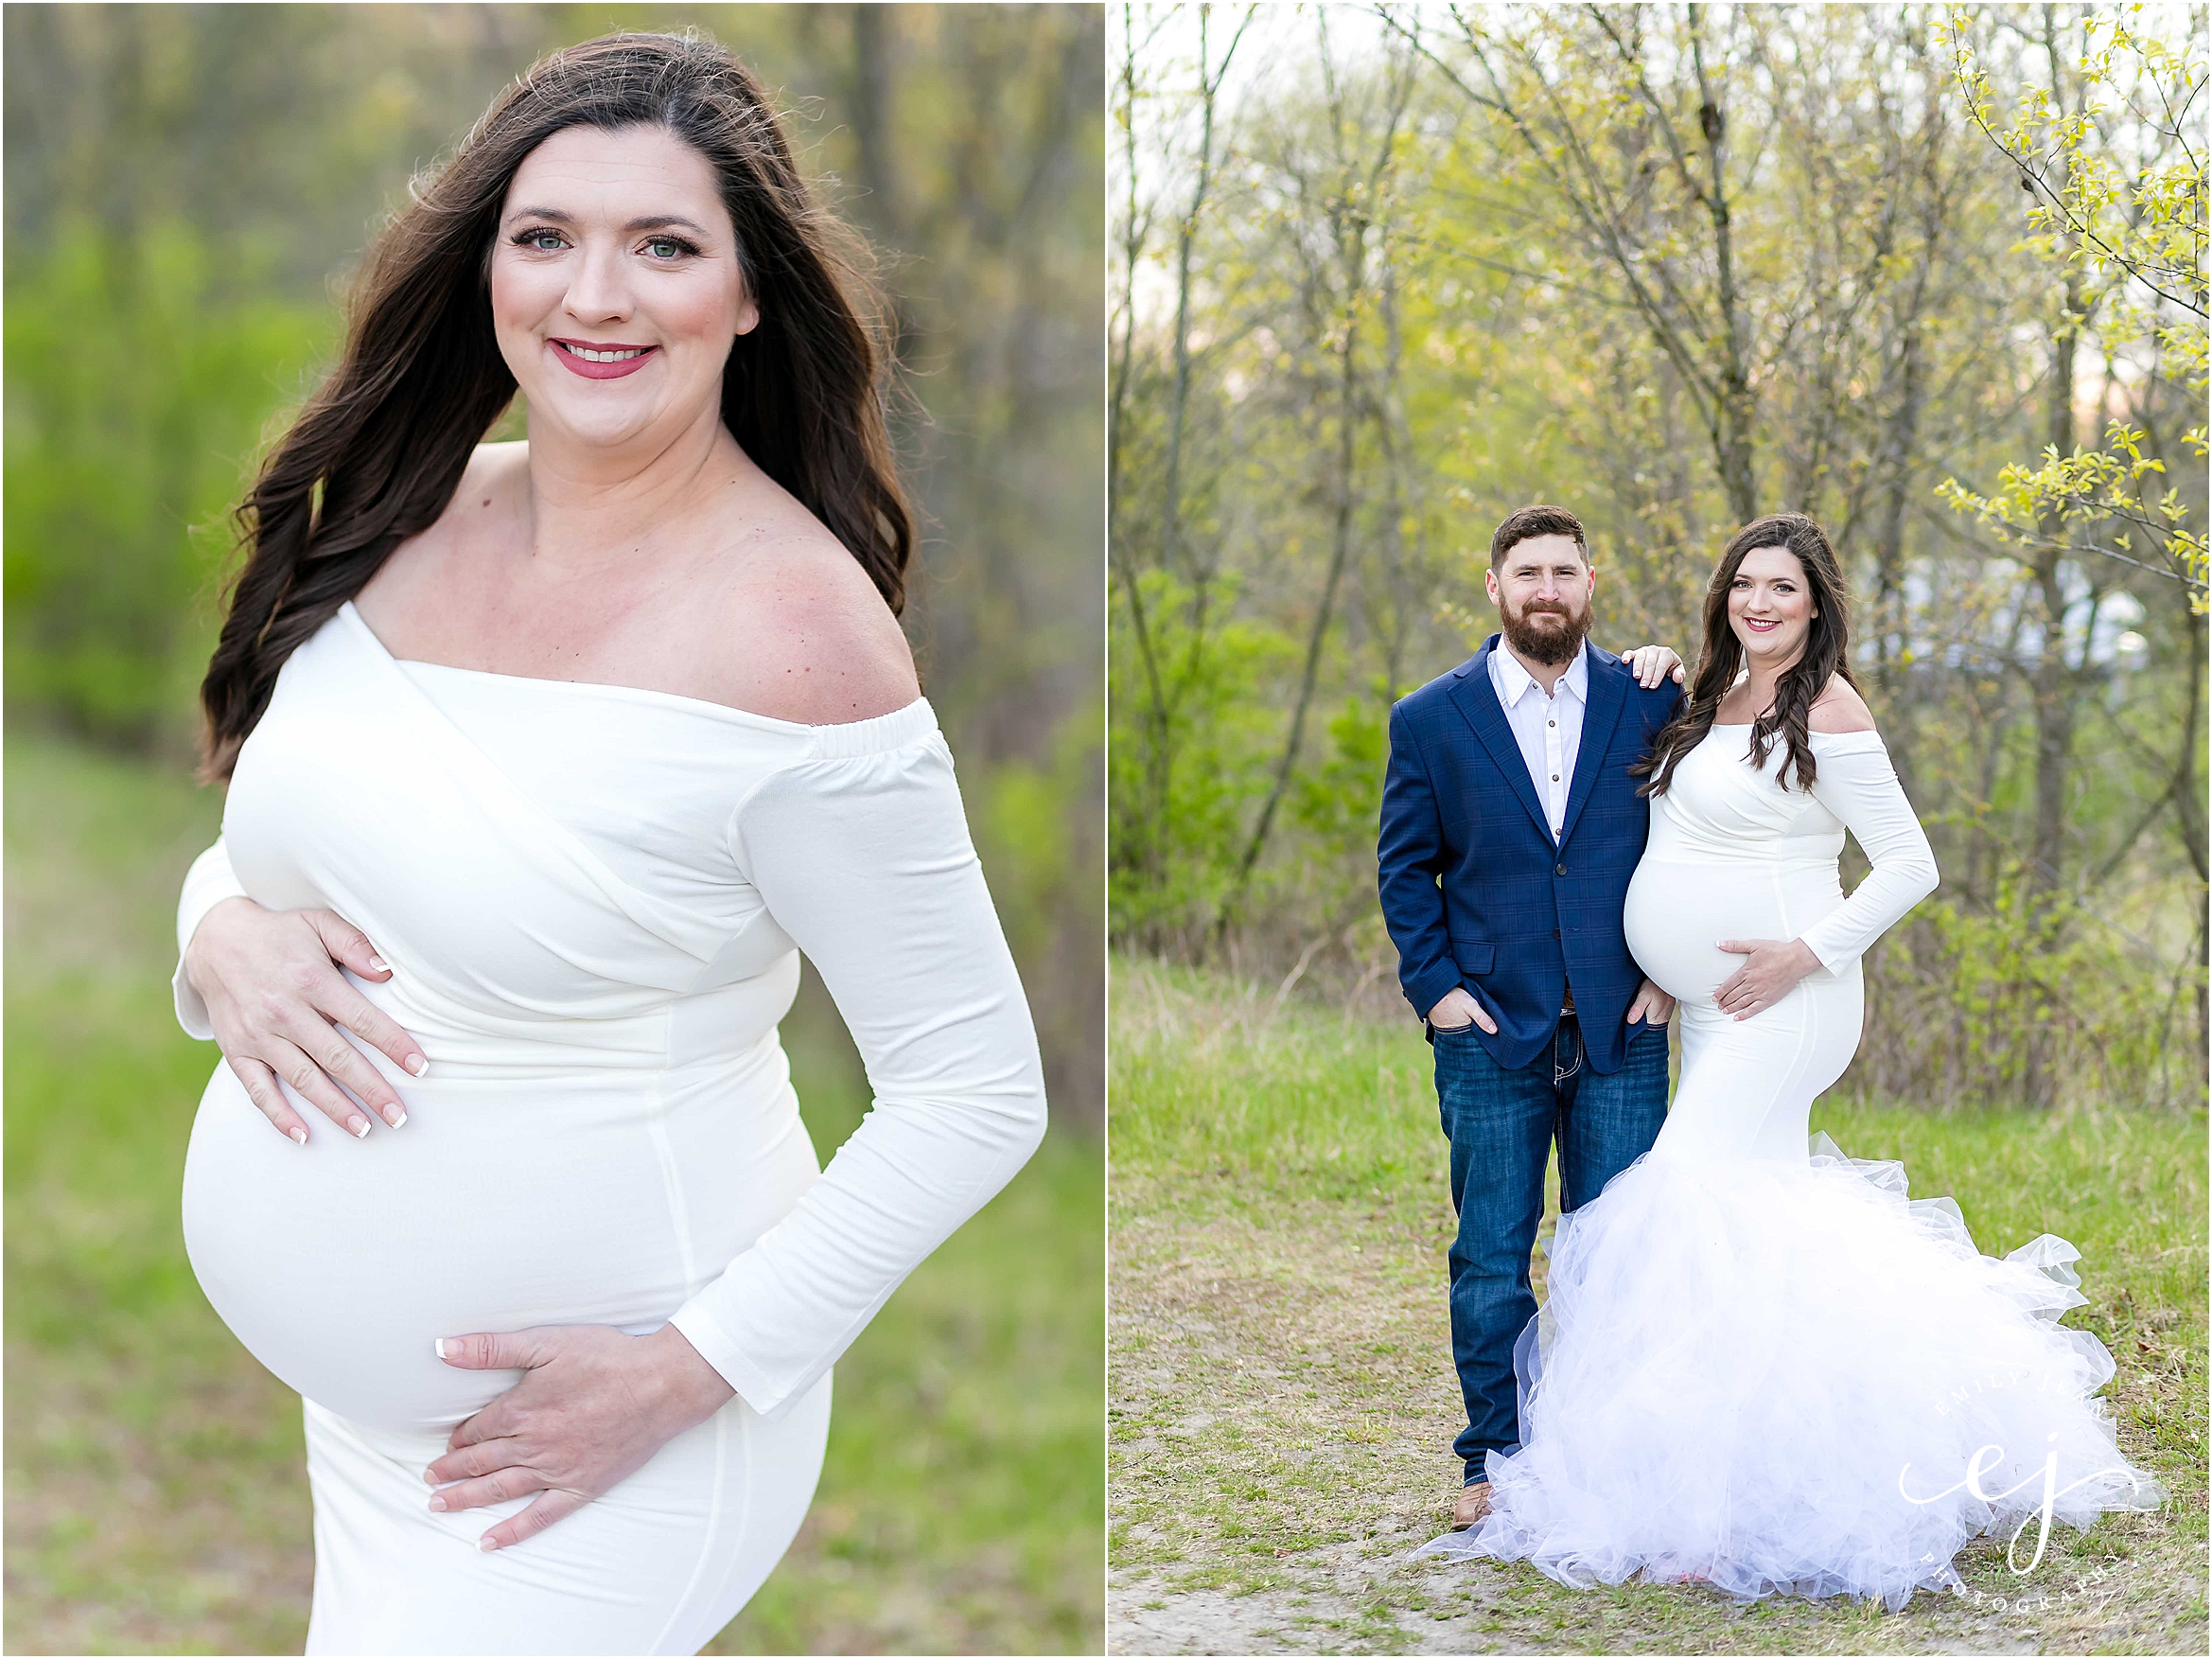 Dry for a couple at maternity session wearing navy and white in the park